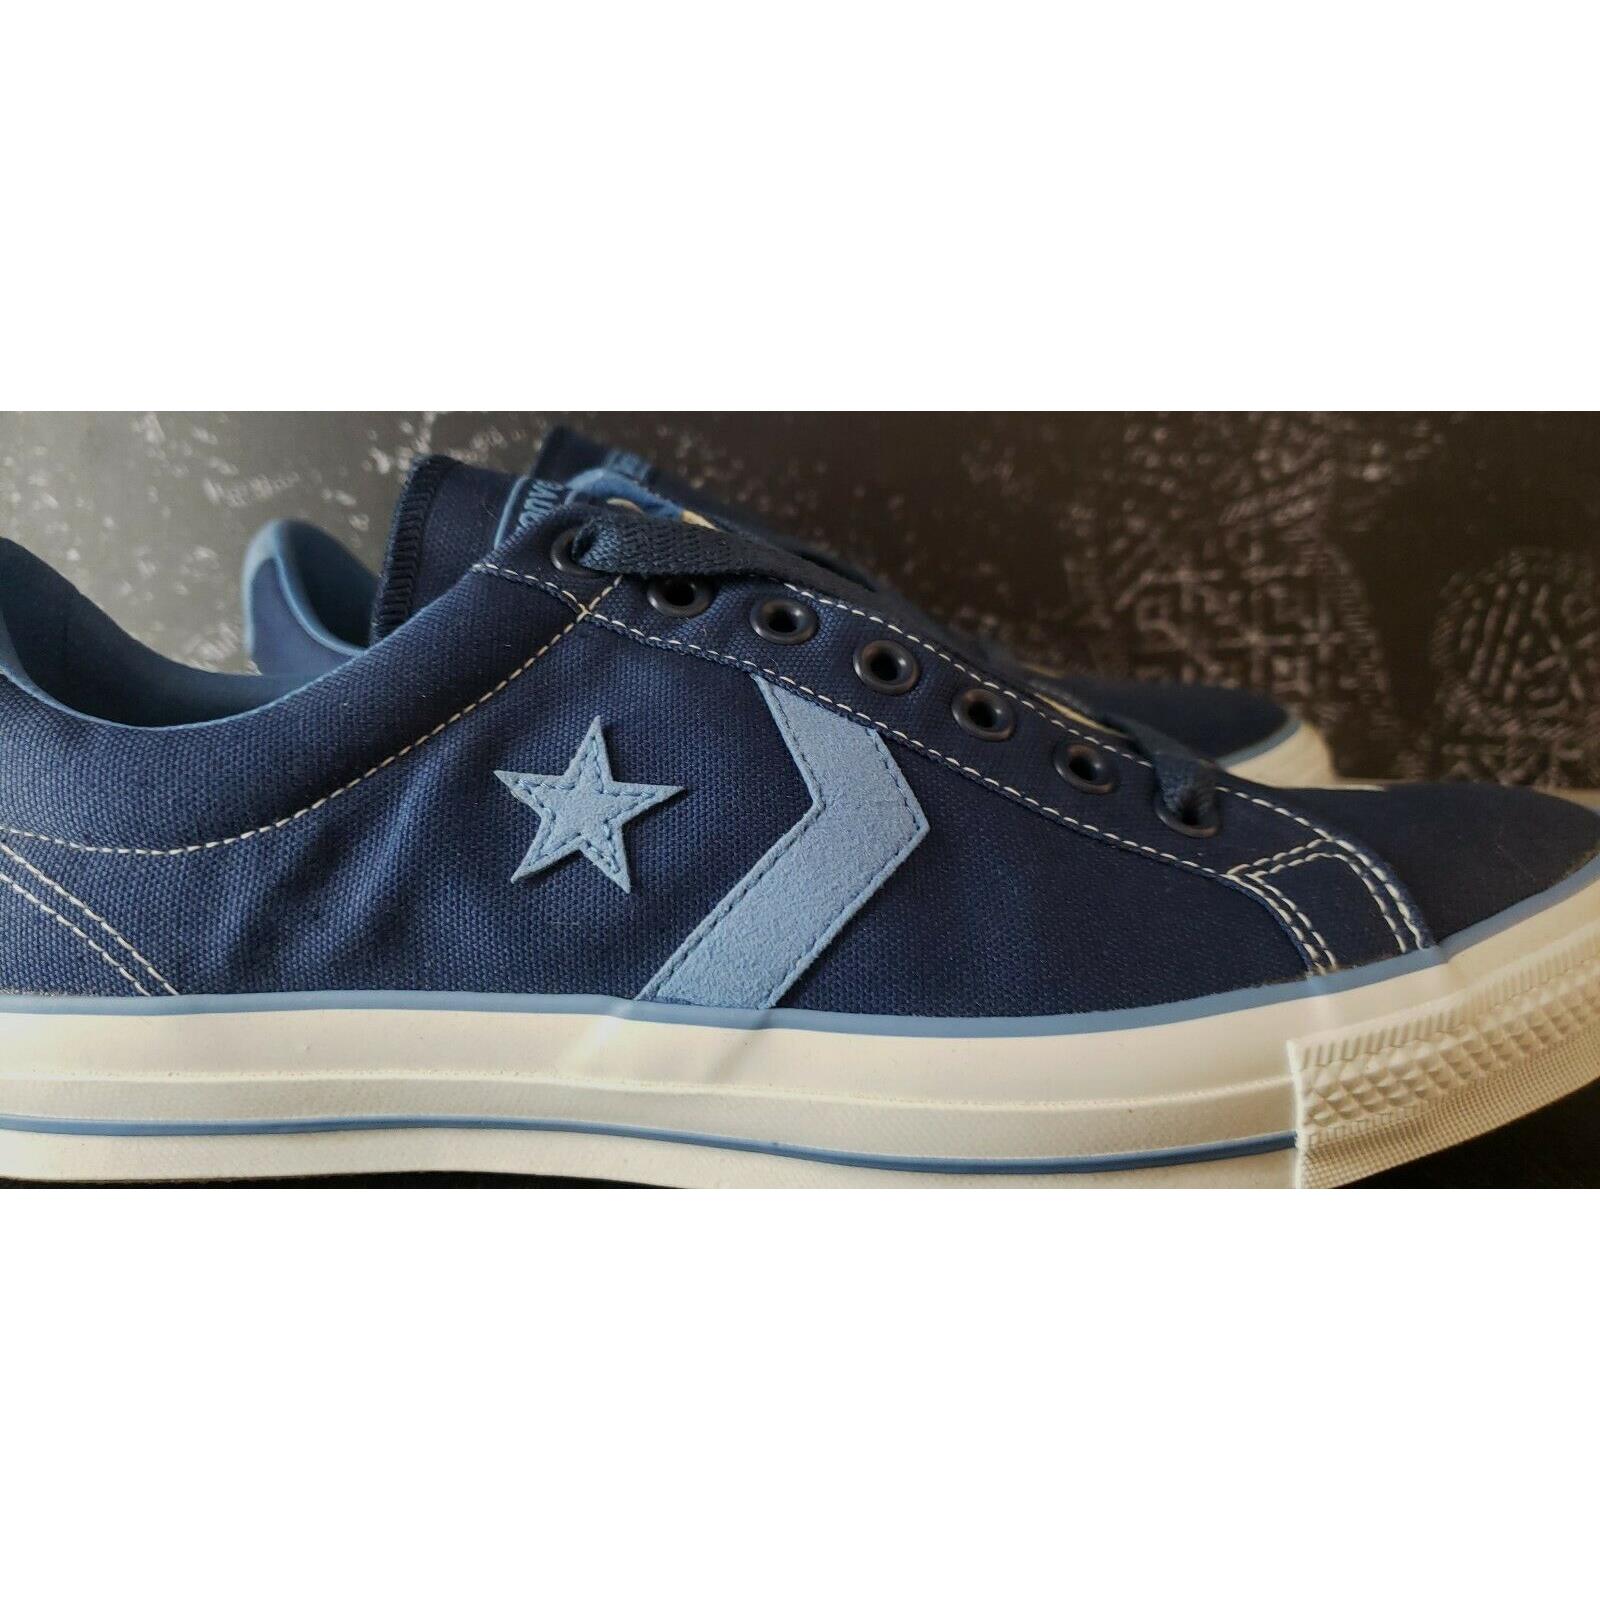 Converse shoes  - Navy blue white 0